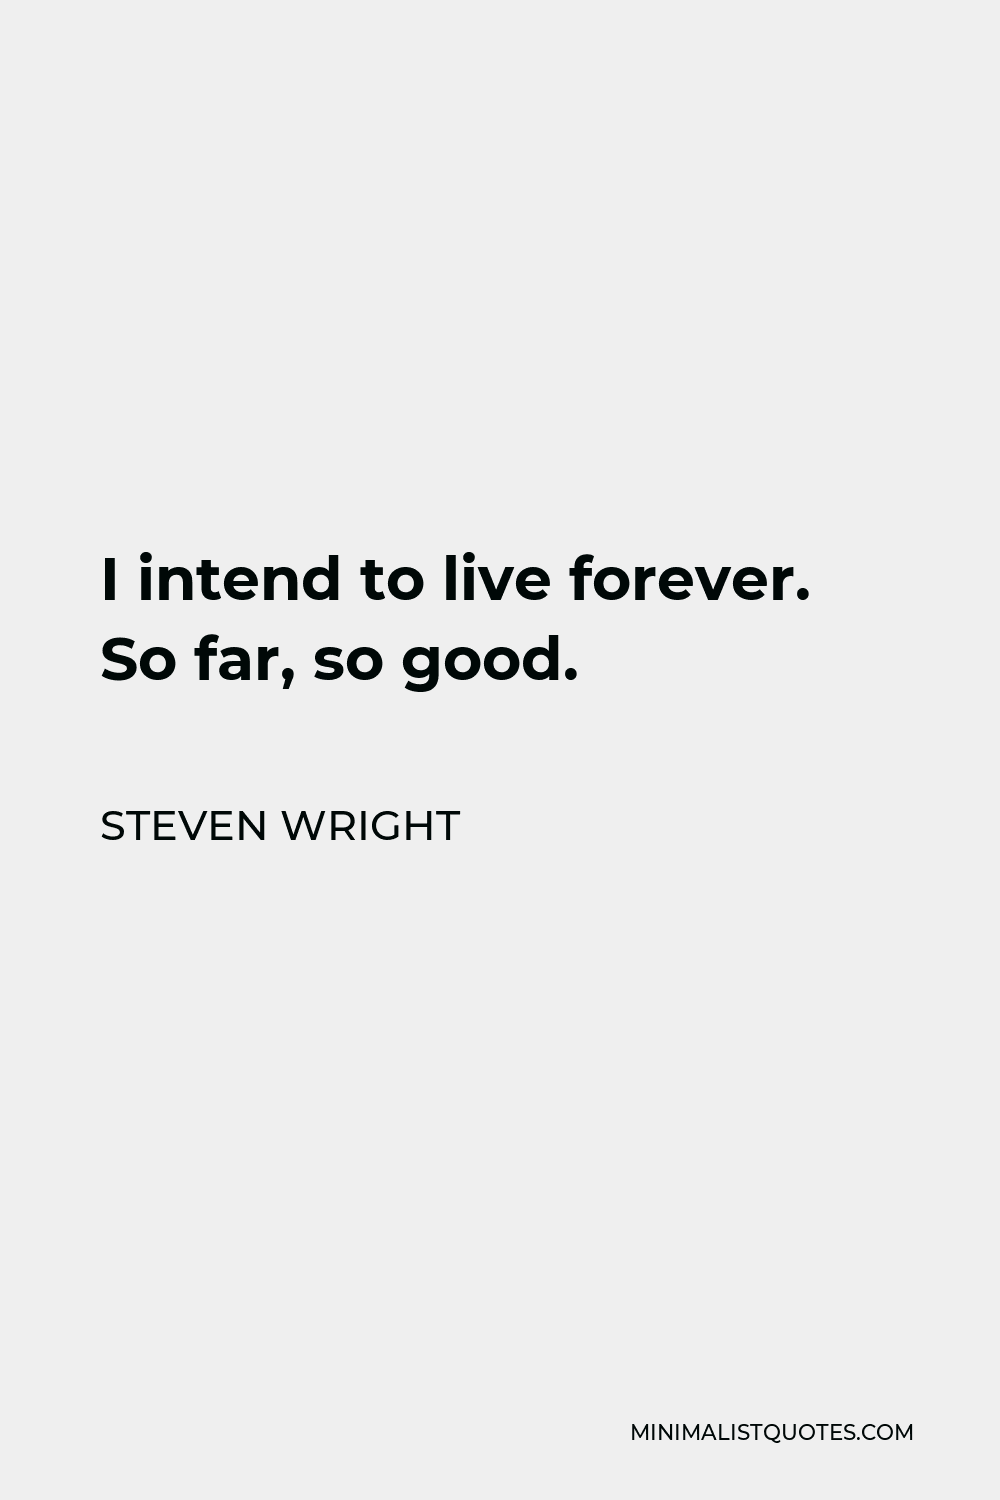 Steven Wright Quote - I intend to live forever. So far, so good.